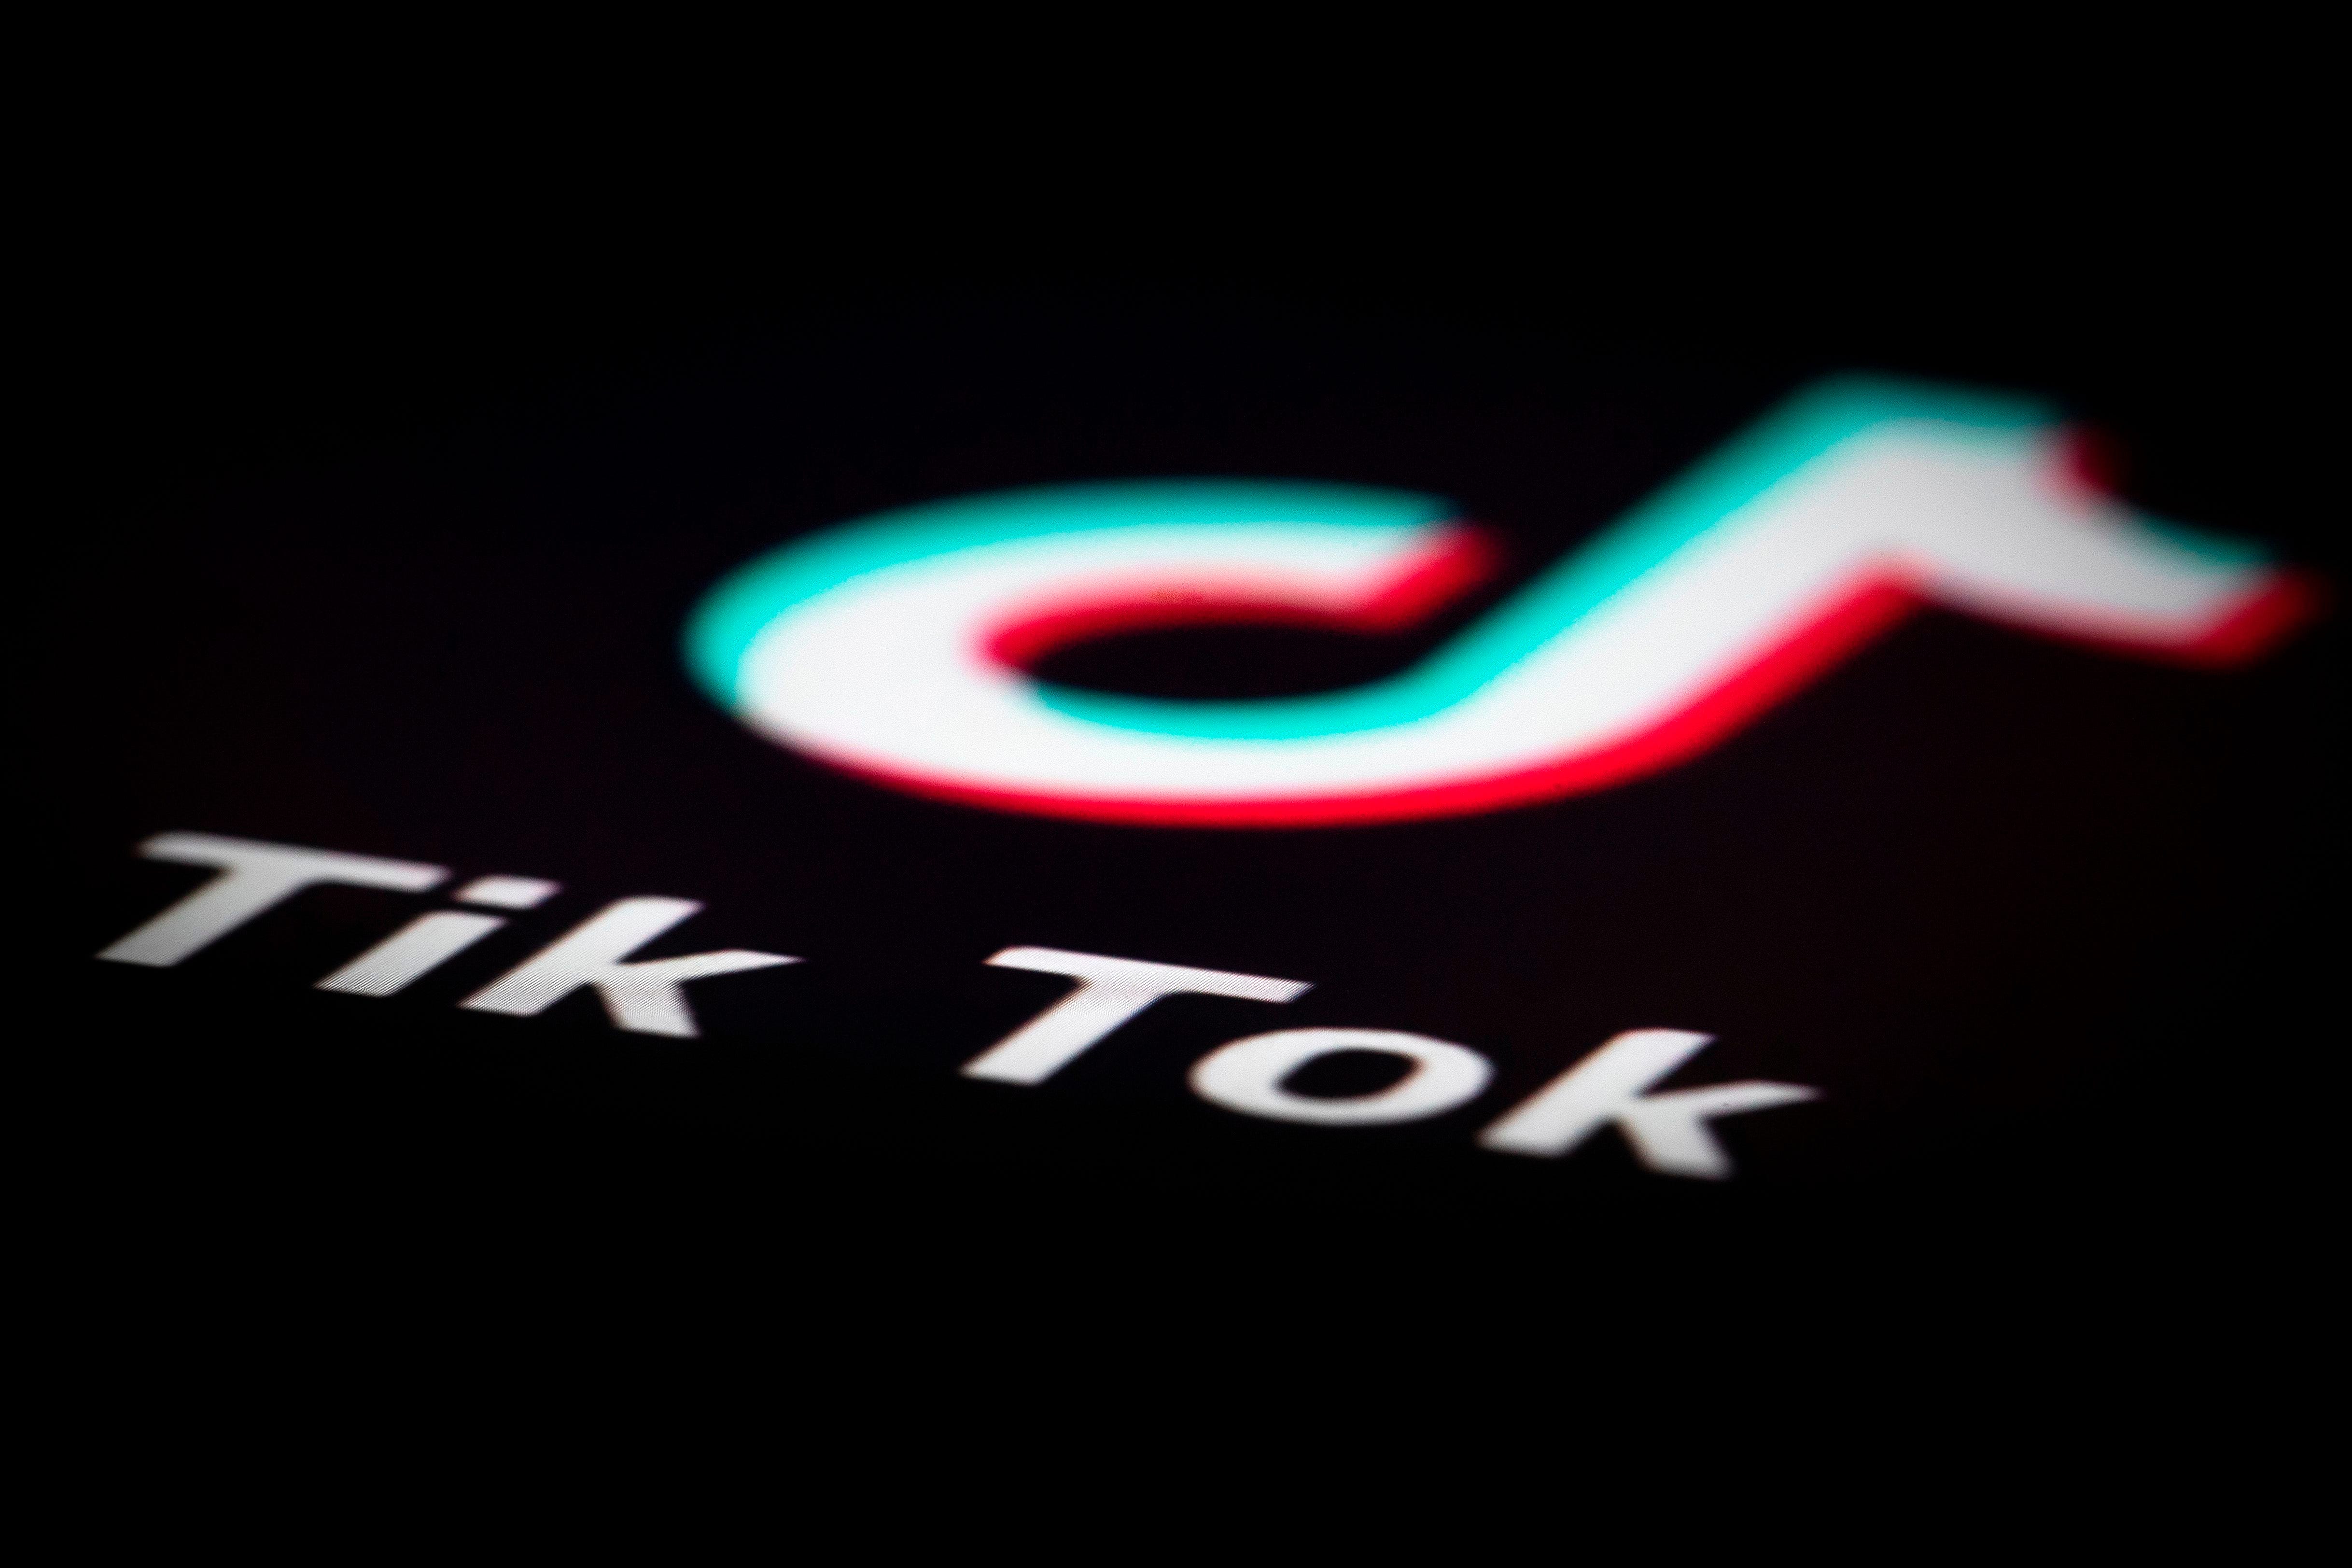 Why are universities banning TikTok? Campuses are limiting use on school devices and Wi-Fi